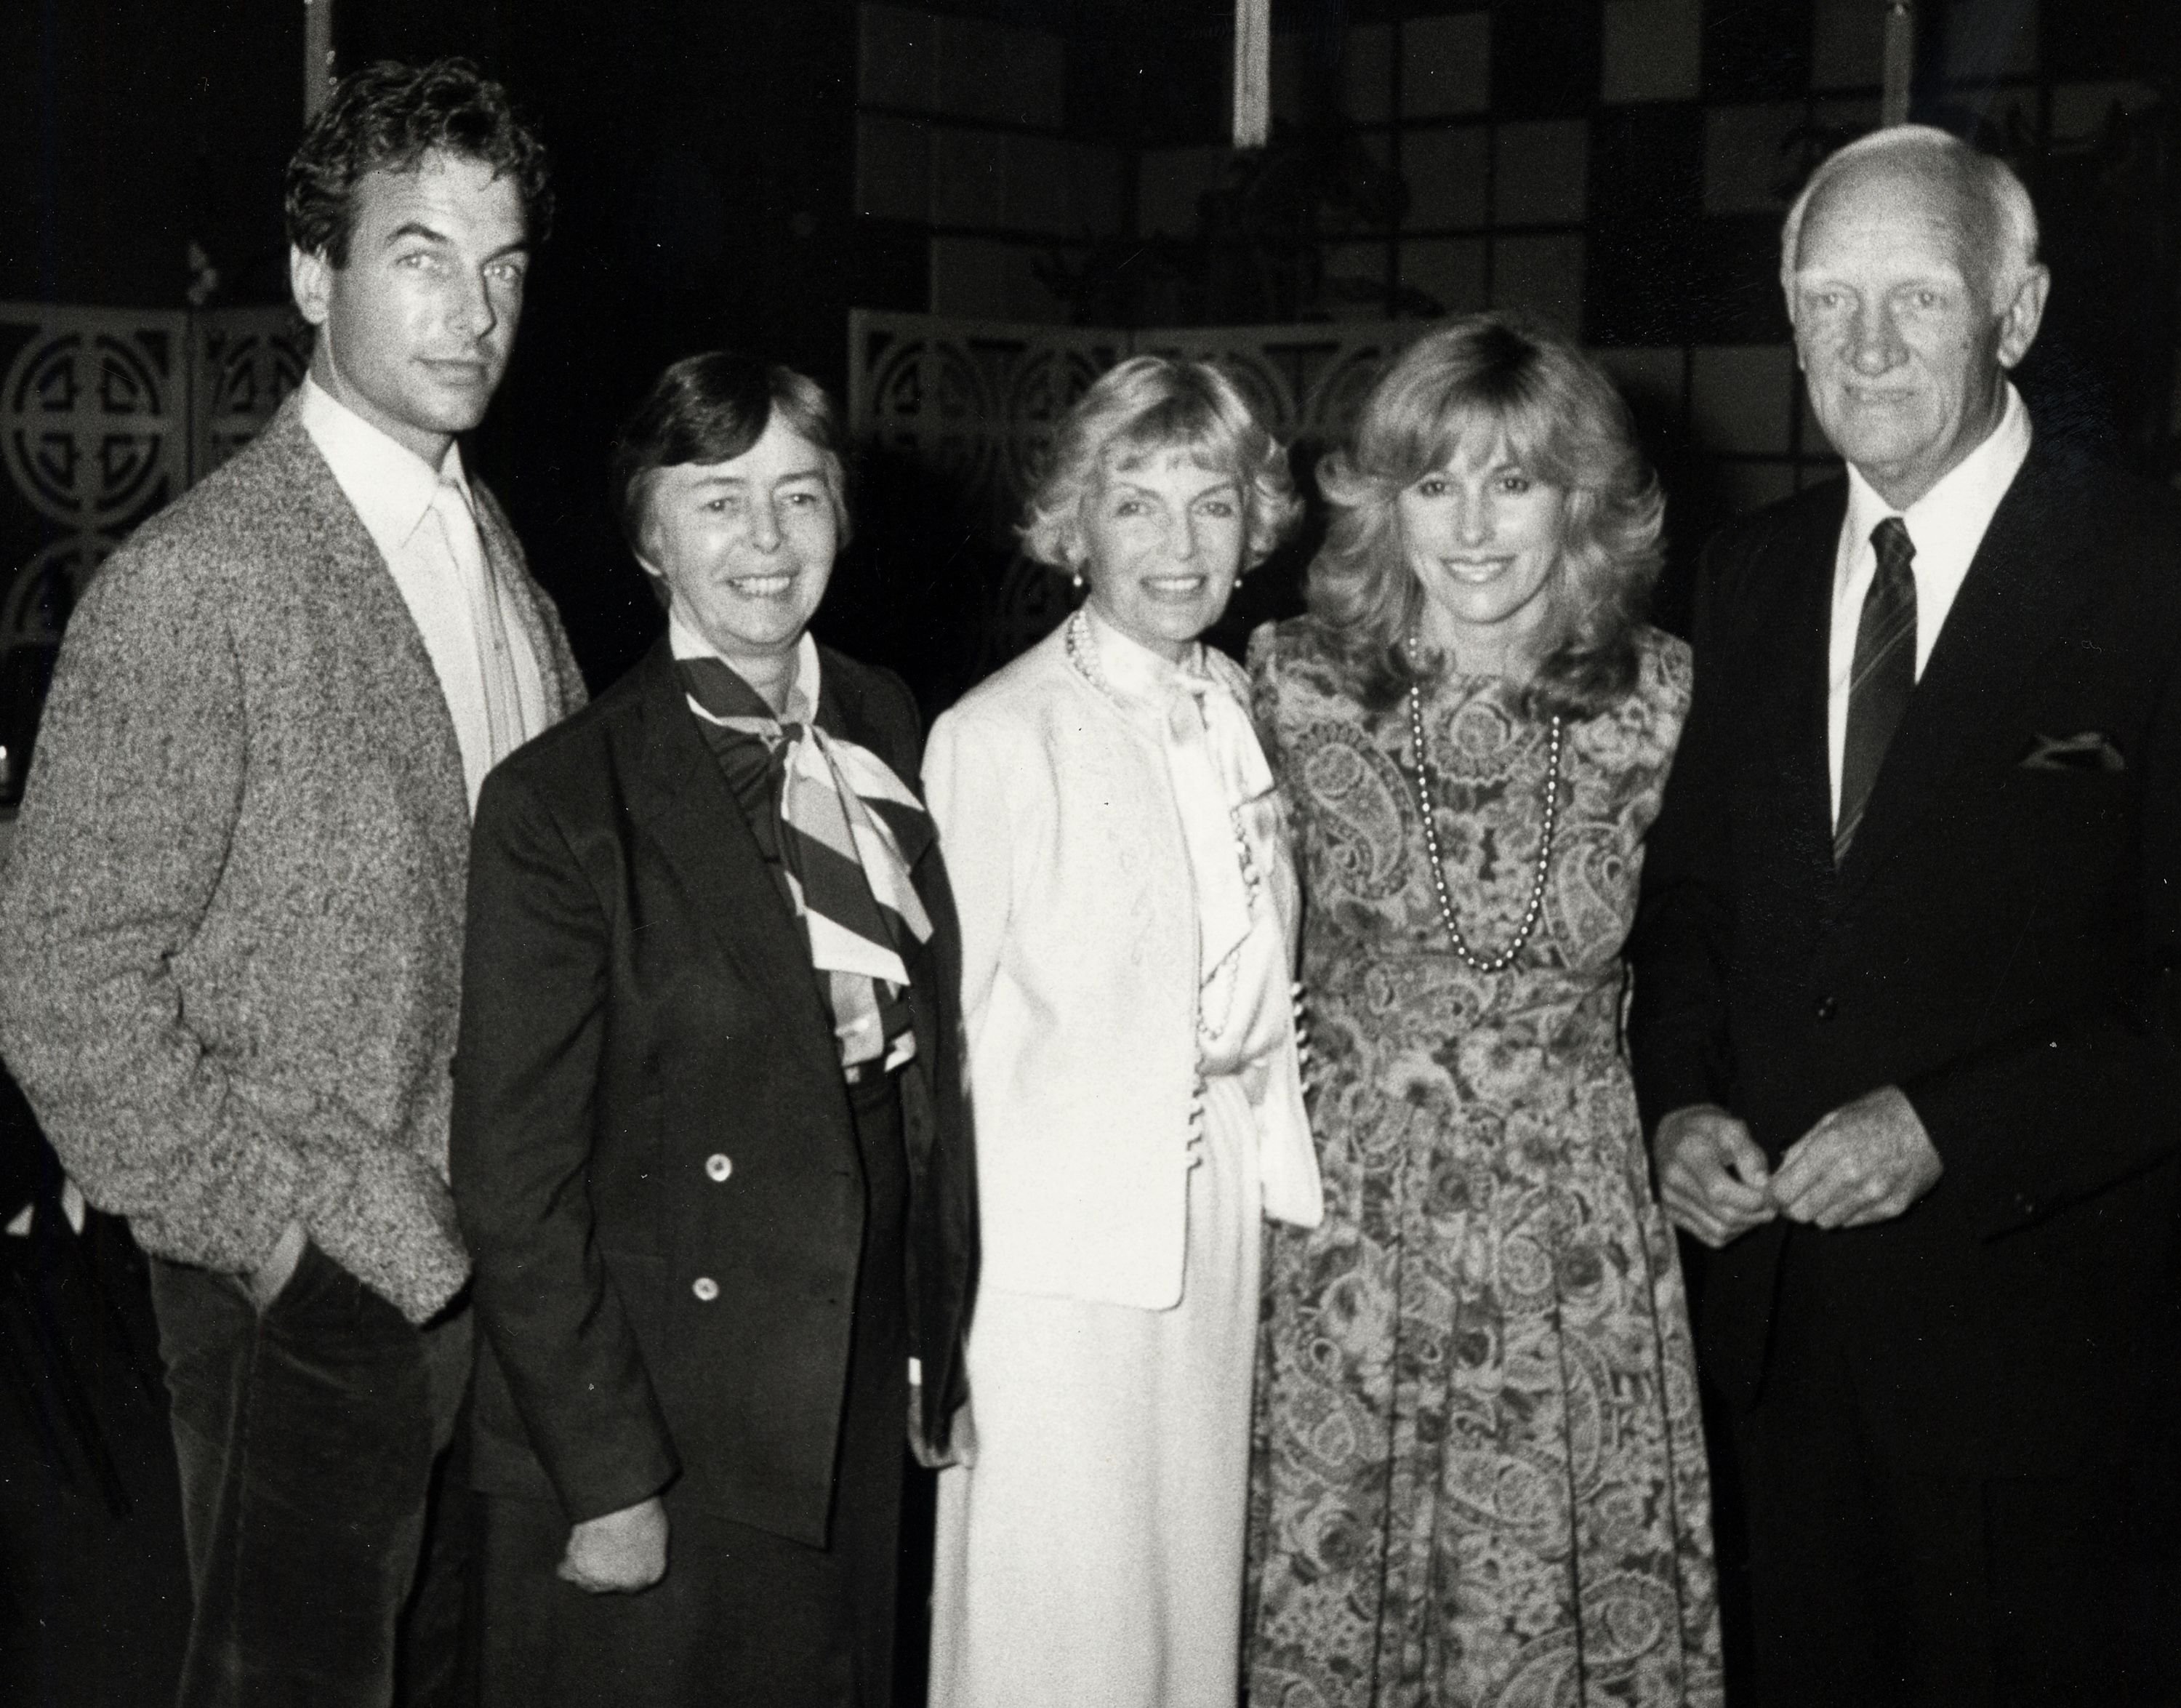 Mark, Kelly, Elyse, Kristin, and Tom Harmon in 1986 at a Chinese New Year's Party | Photo: Ron Galella/Ron Galella Collection/Getty Images